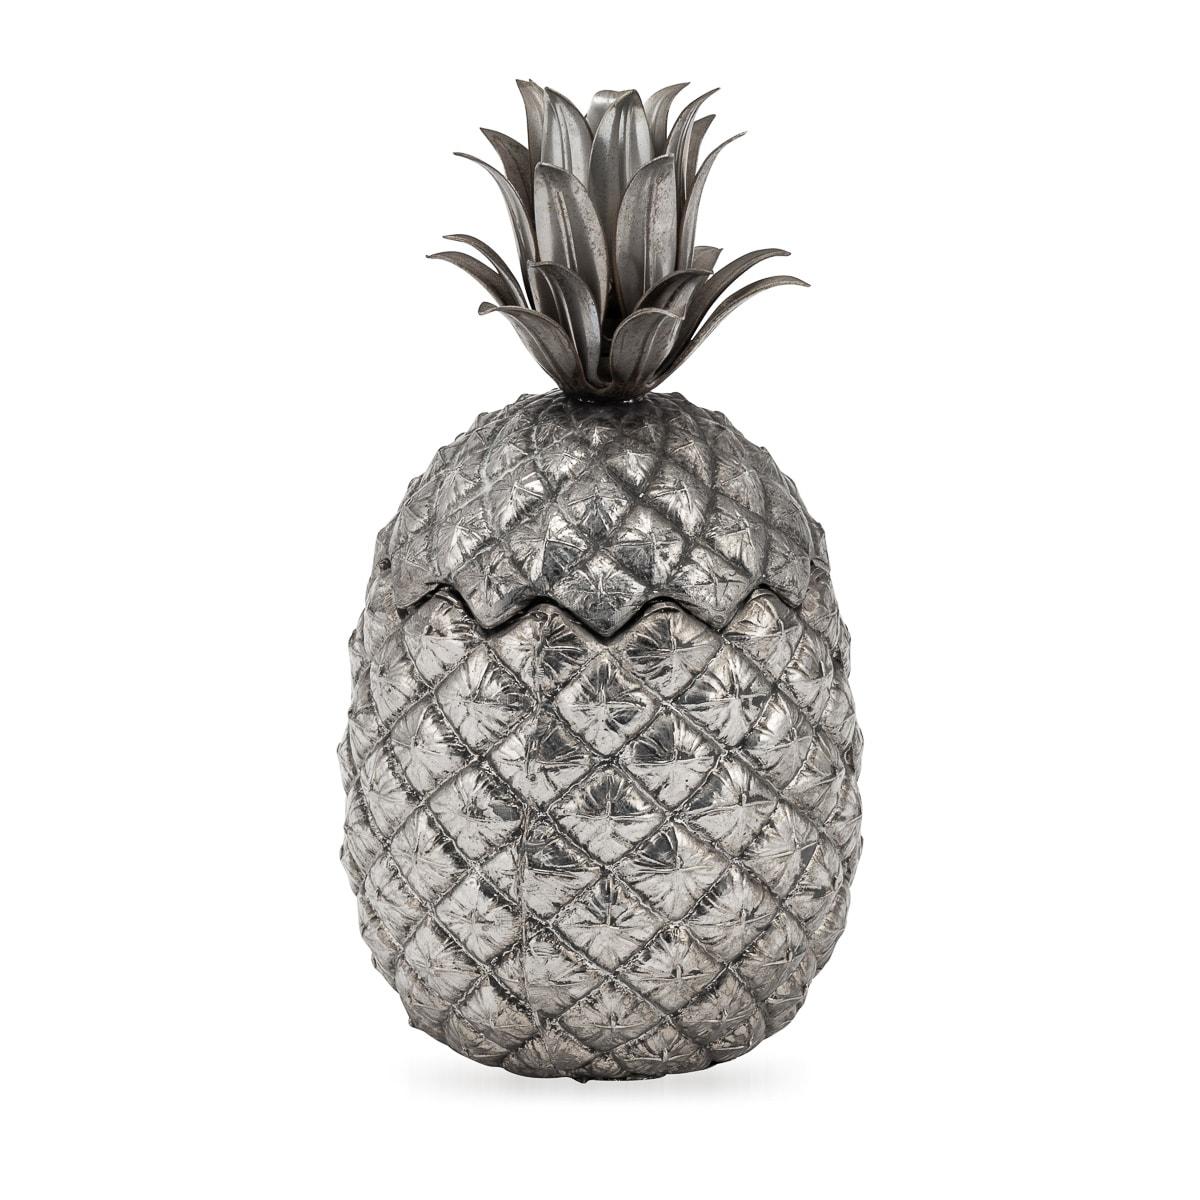 A stunning ice bucket designed by Mauro Manetti, originating from Italy in the vibrant era of the 1970s. This exceptional piece, shaped like a pineapple, showcases the creative brilliance of Mauro Manetti and was meticulously crafted for the